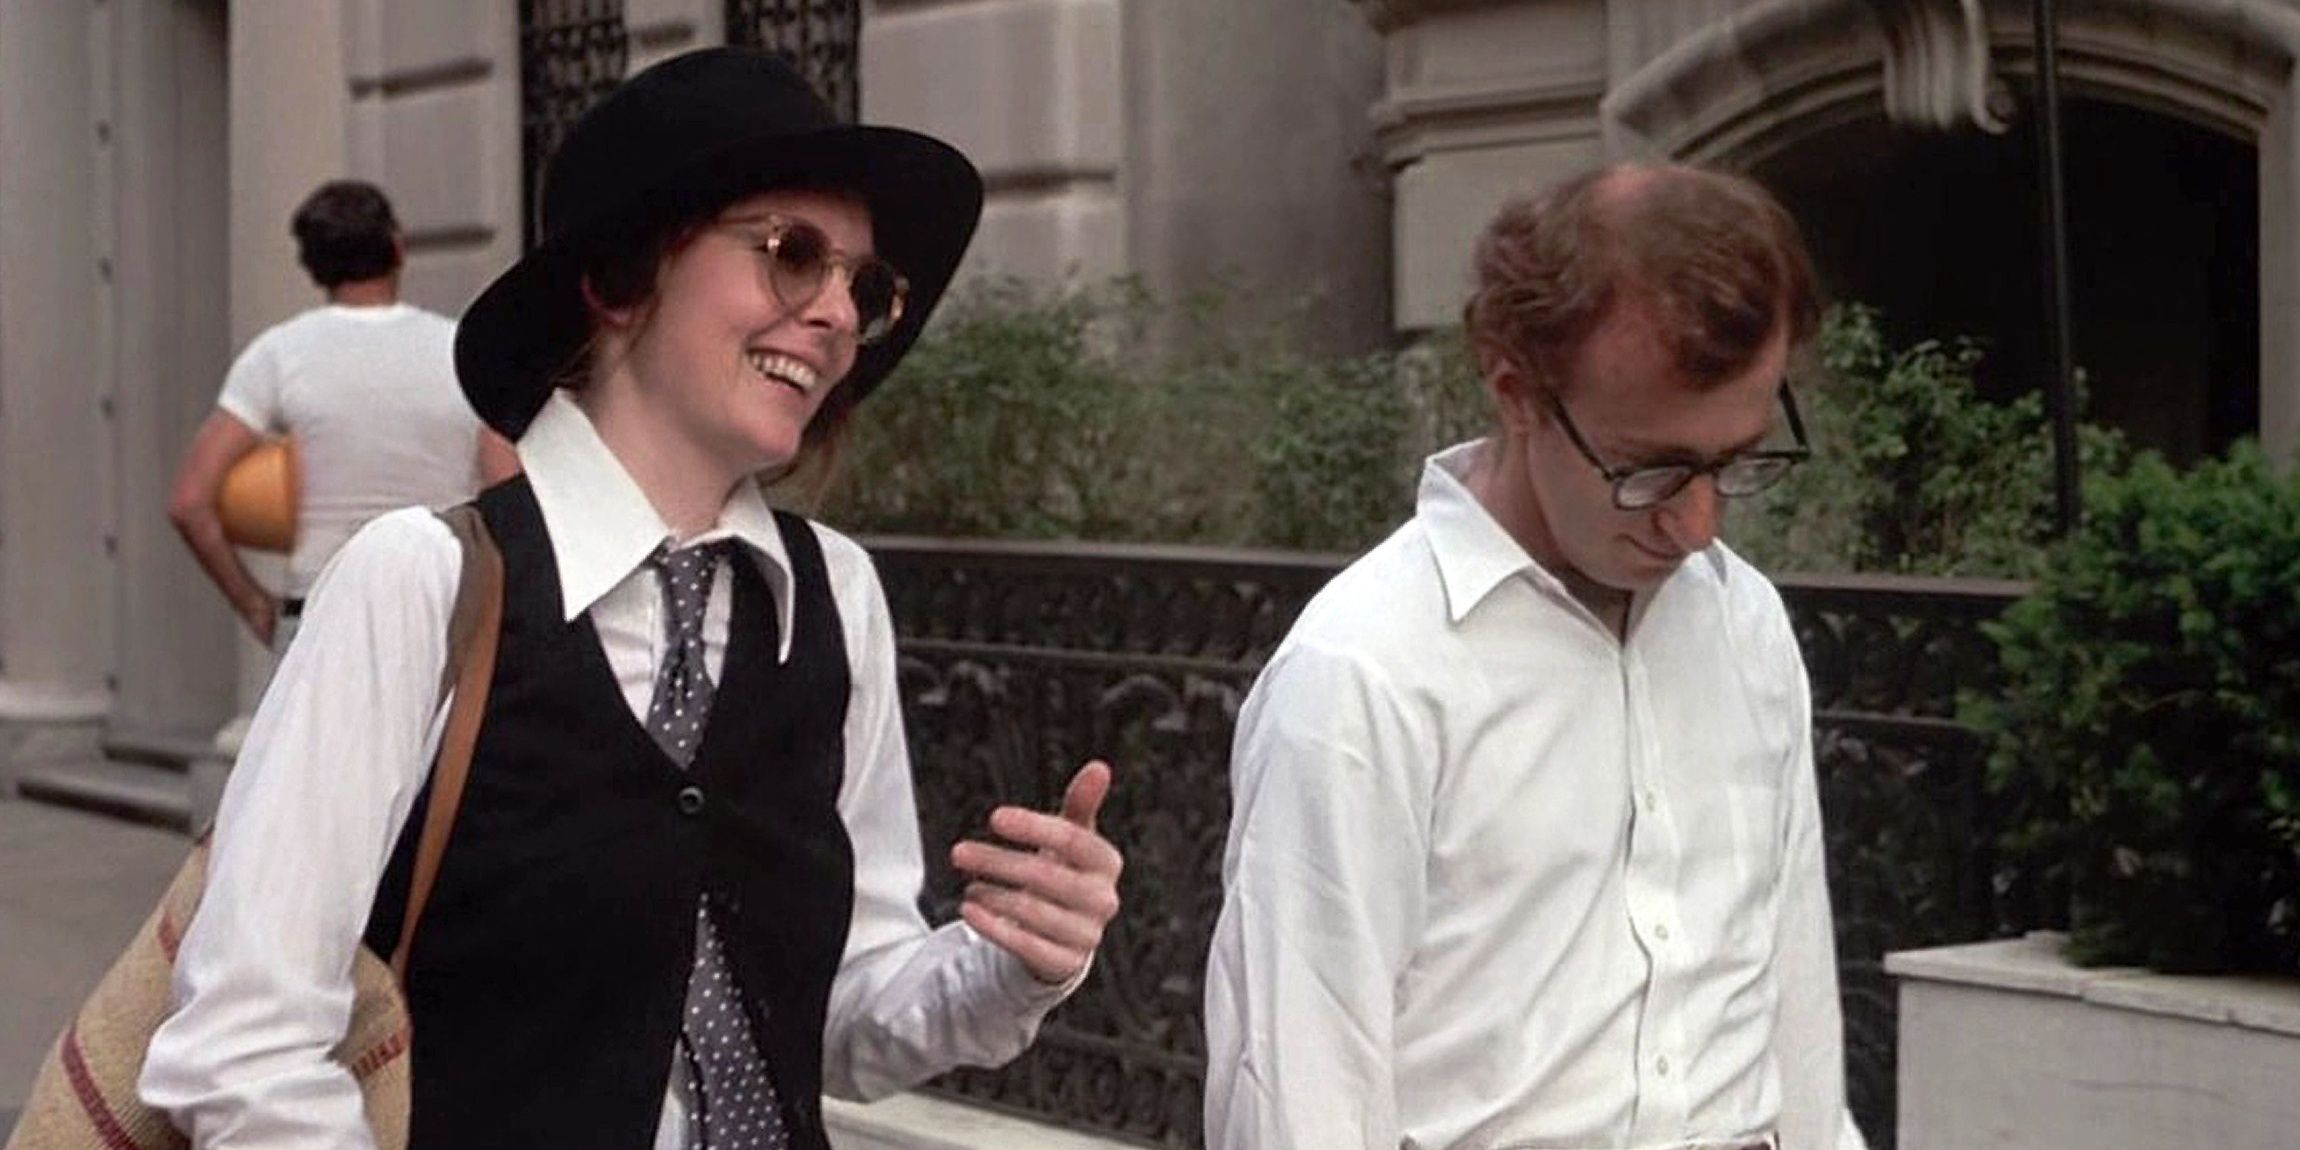 The 10 Best Romantic Comedies Of All Time According To The AFI